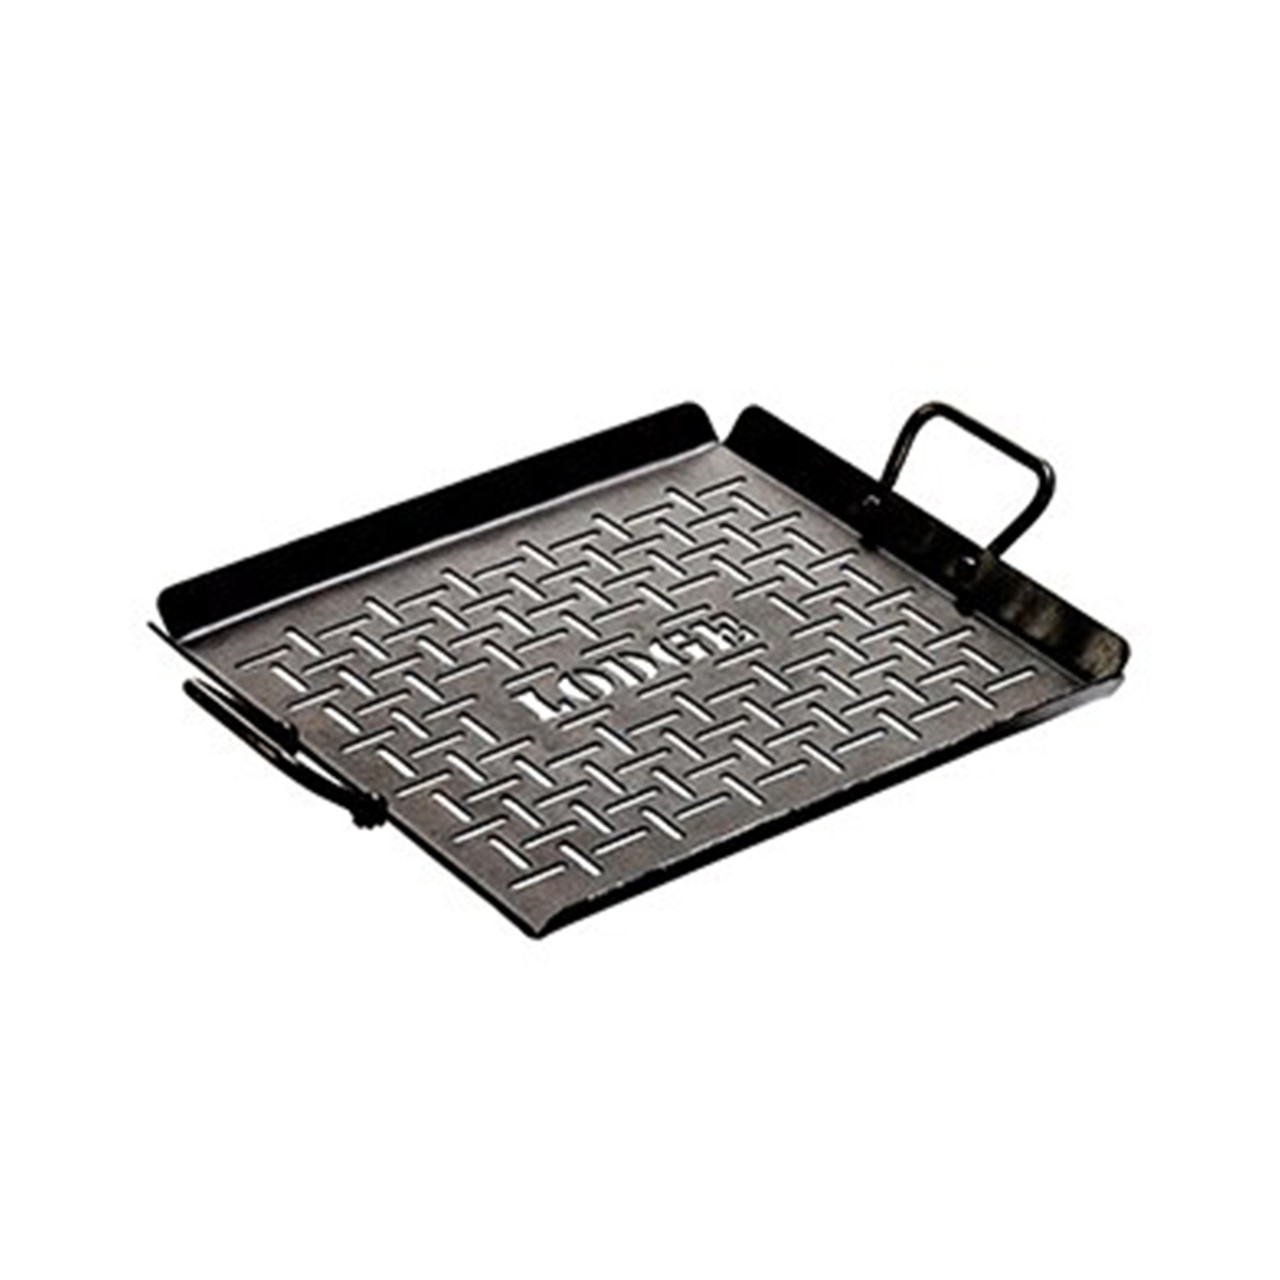 Lodge Carbon Steel Grilling Pan - Cooks